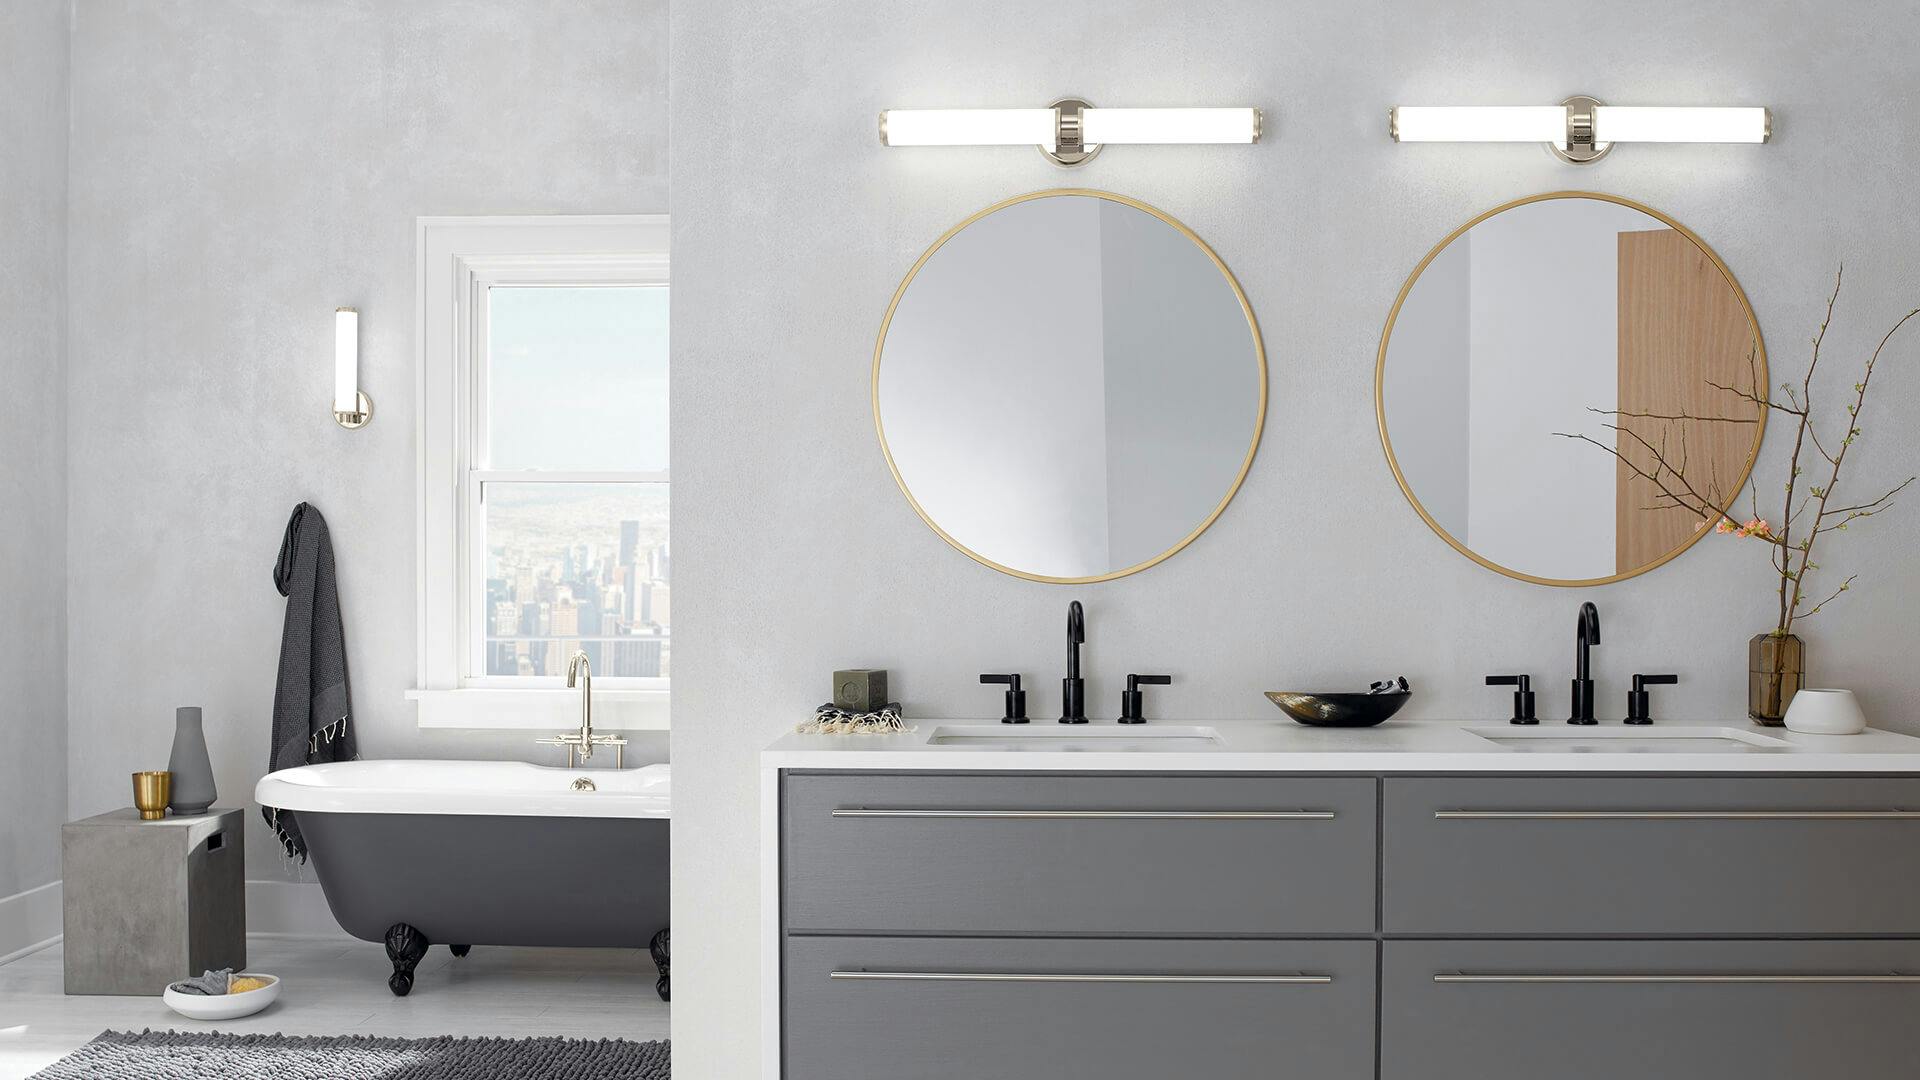 High rise bathroom during the day with two Indeco lights above two round mirrors